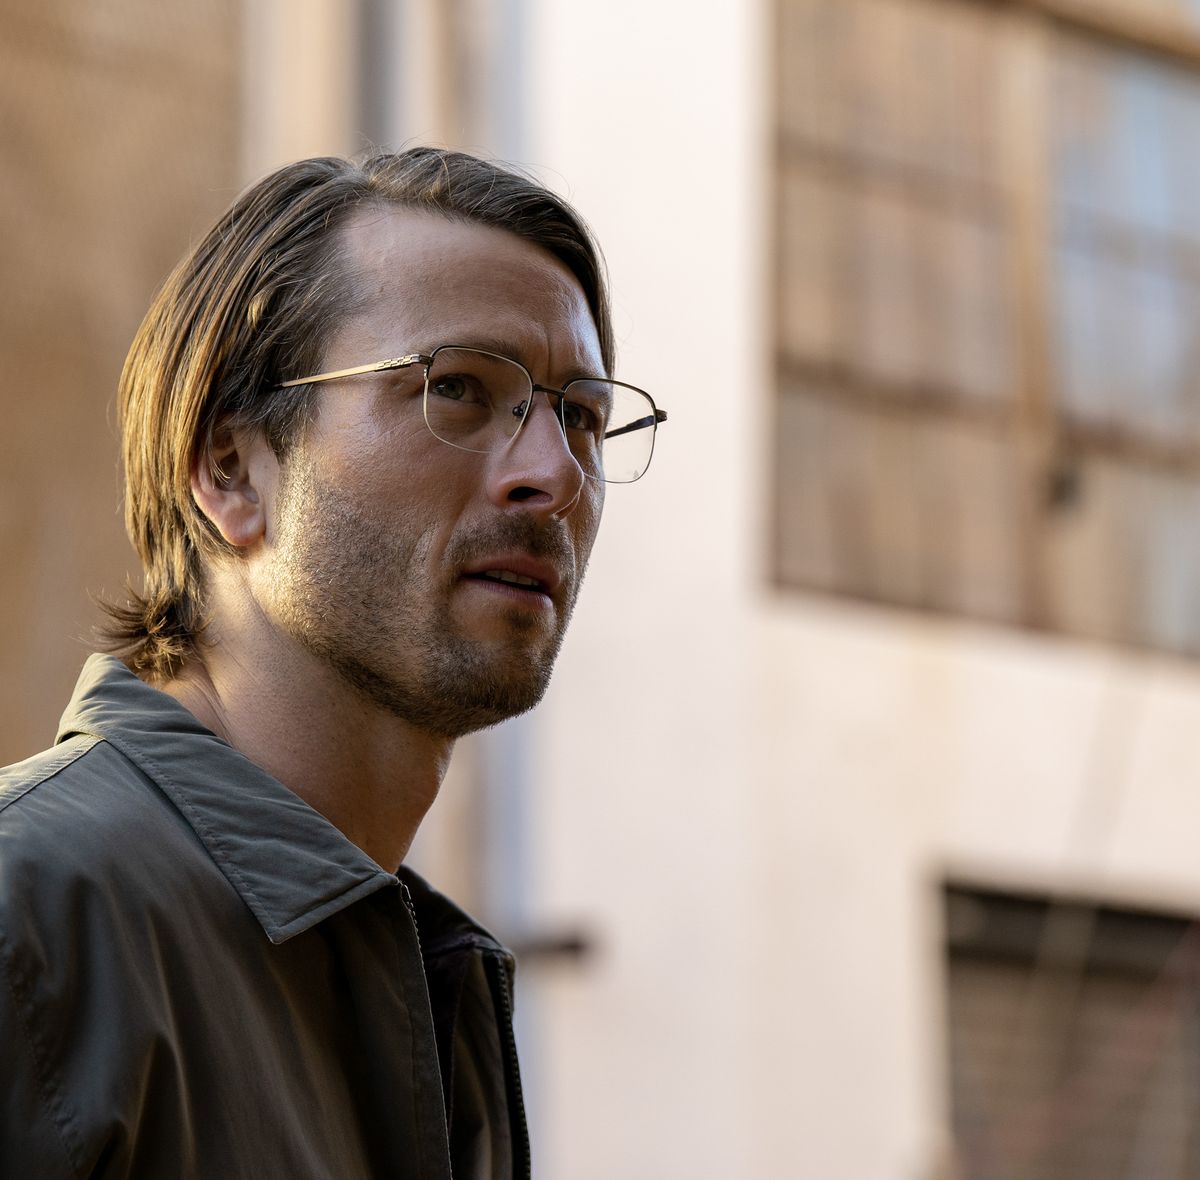 glen powell with long hair and glasses standing in front of an old warehouse in a scene from hit man